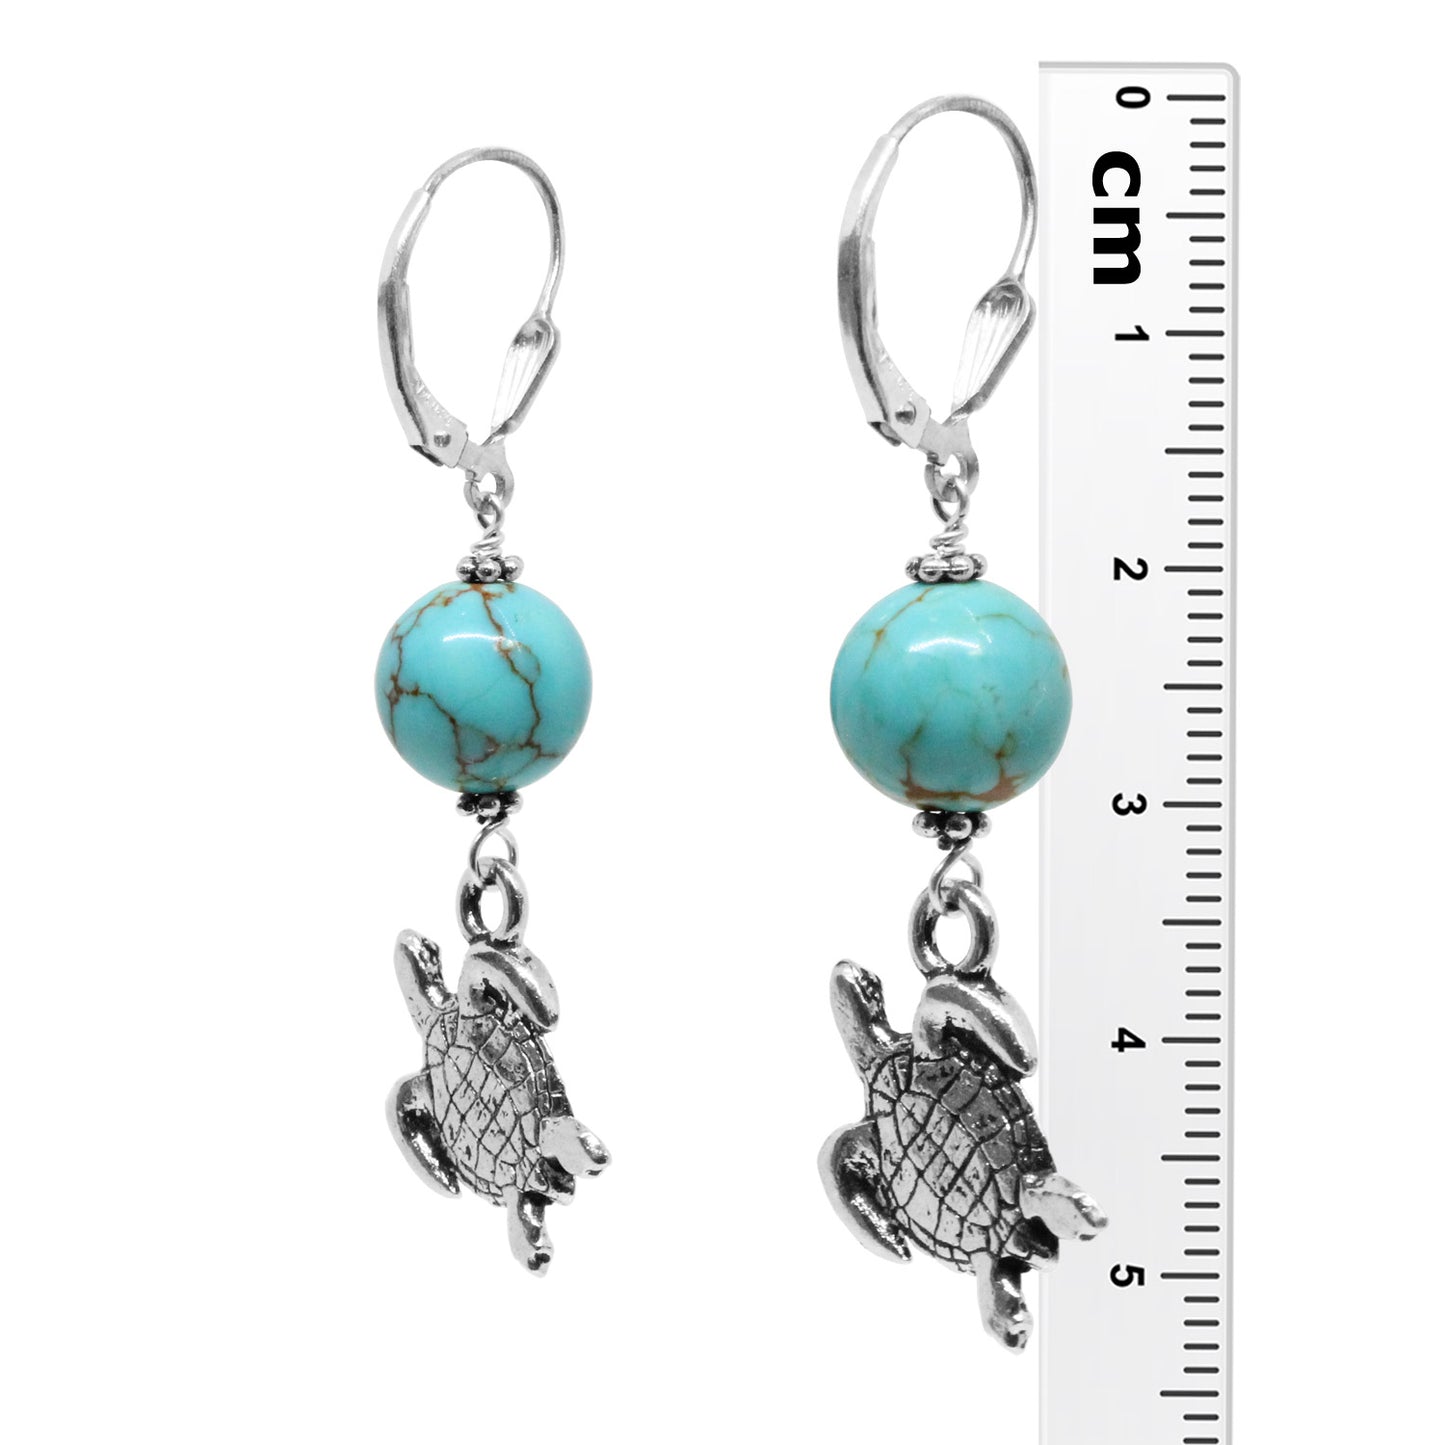 Turquoise Island Sea Turtle Earrings / 53mm length / sterling silver shell leverback earwires